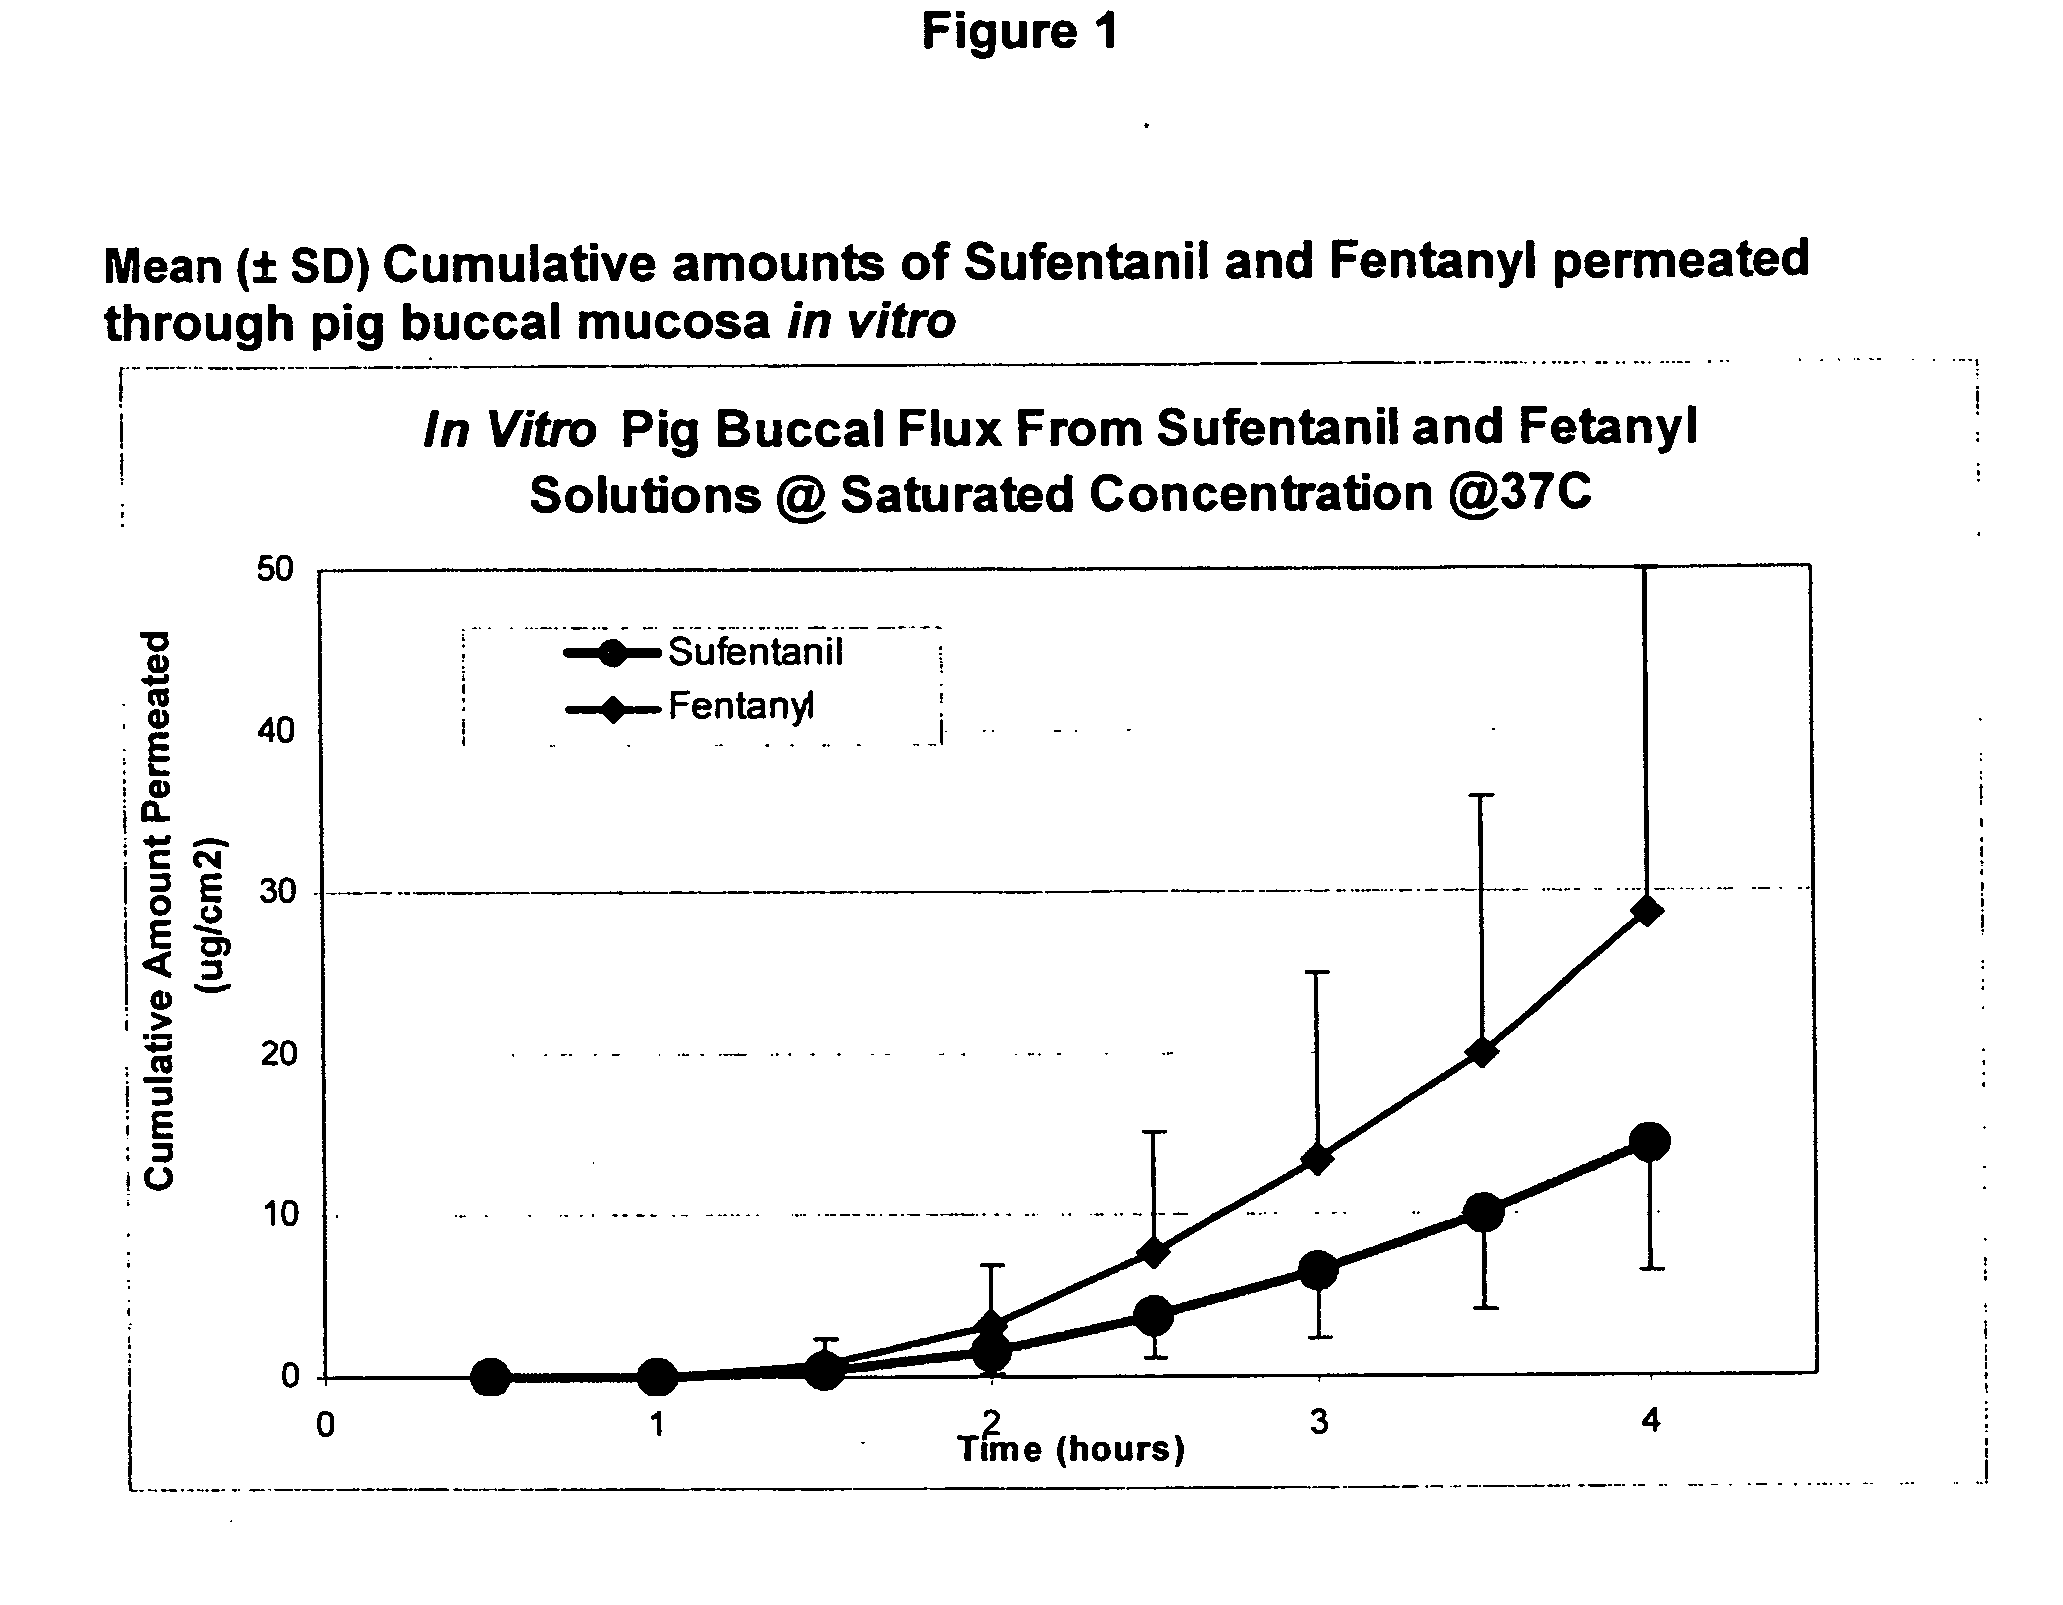 Transoral dosage forms comprising sufentanil and naloxone